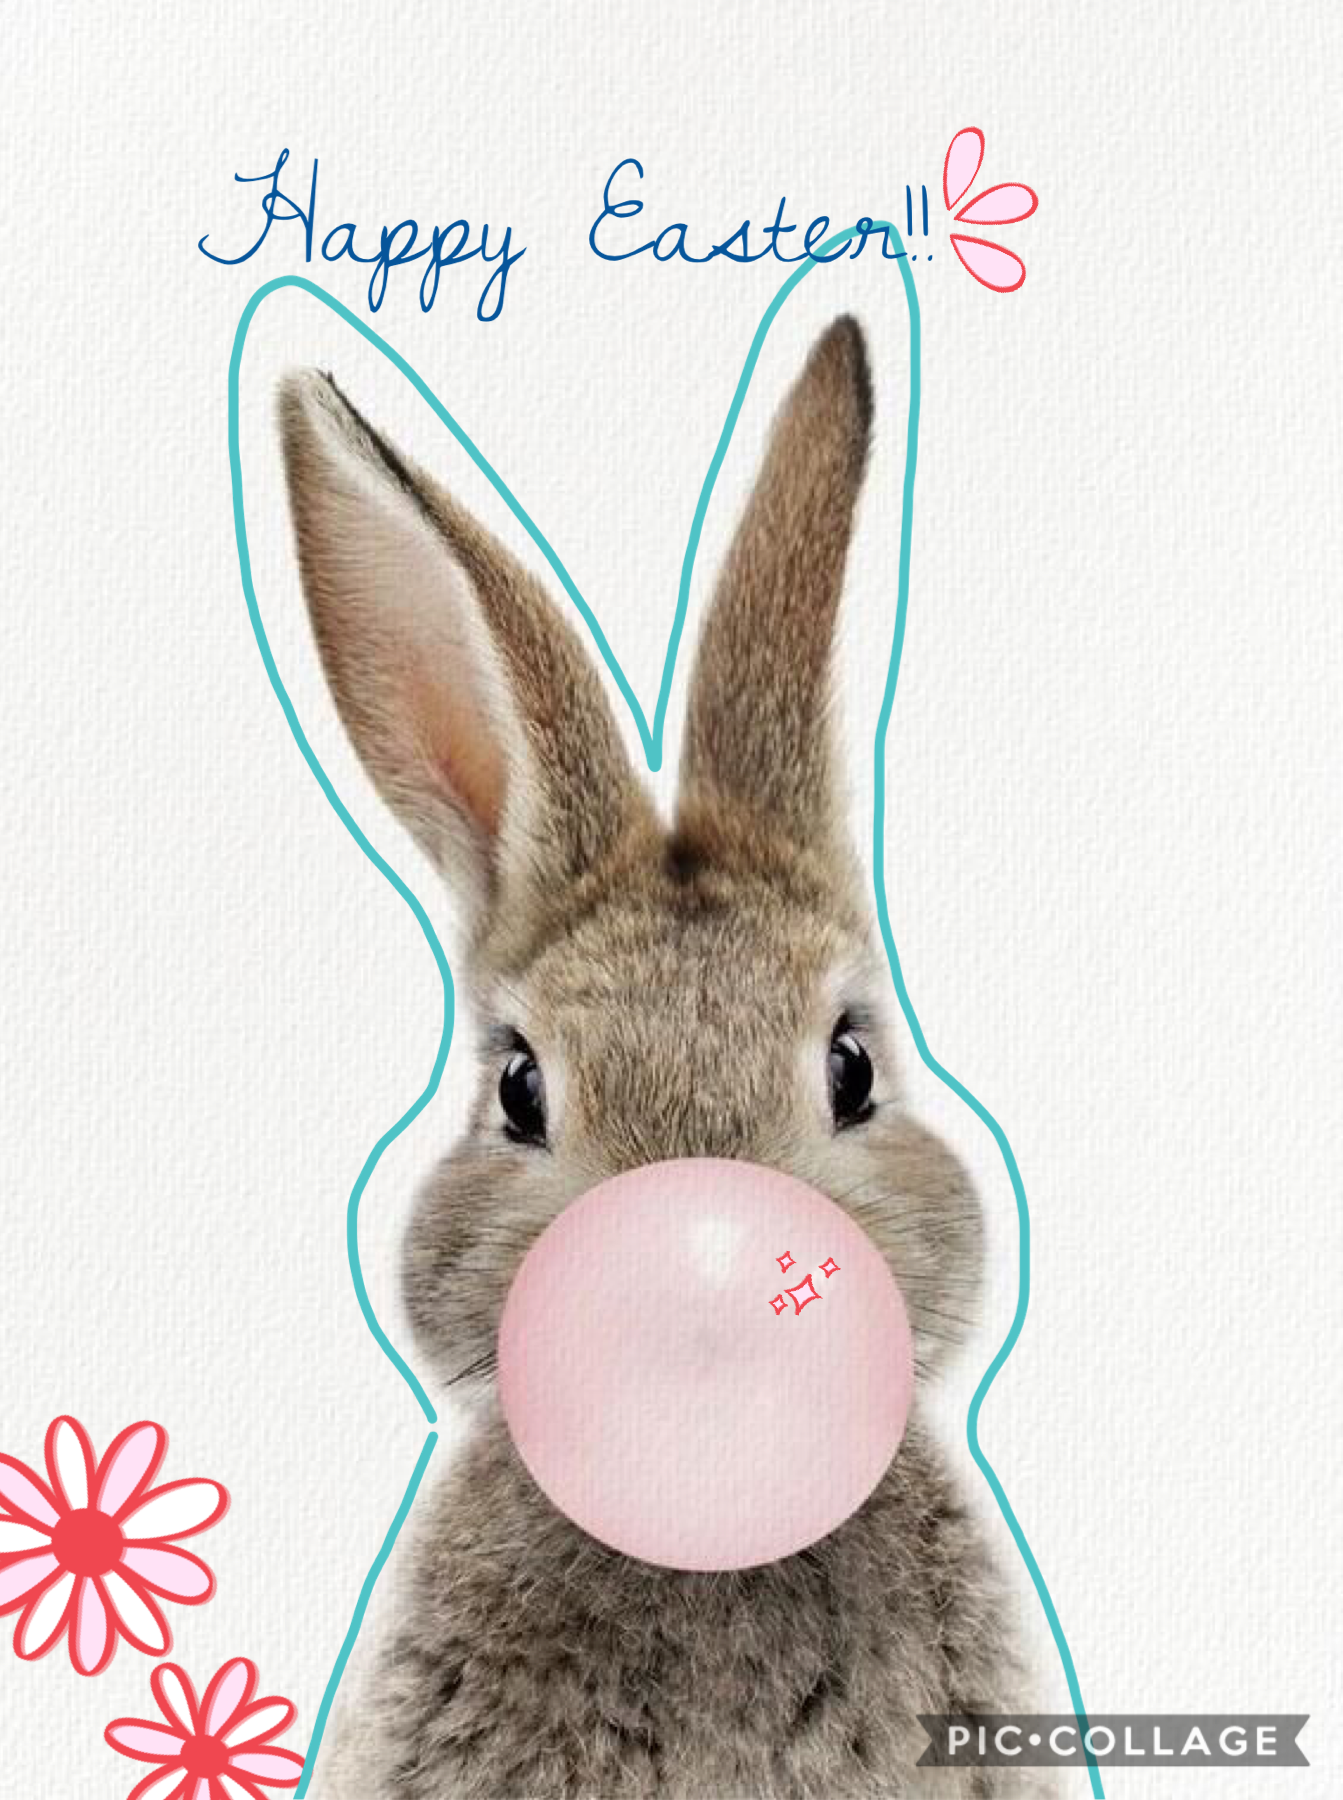 Hope you have an awesome Easter!!!🐰🐰🐣